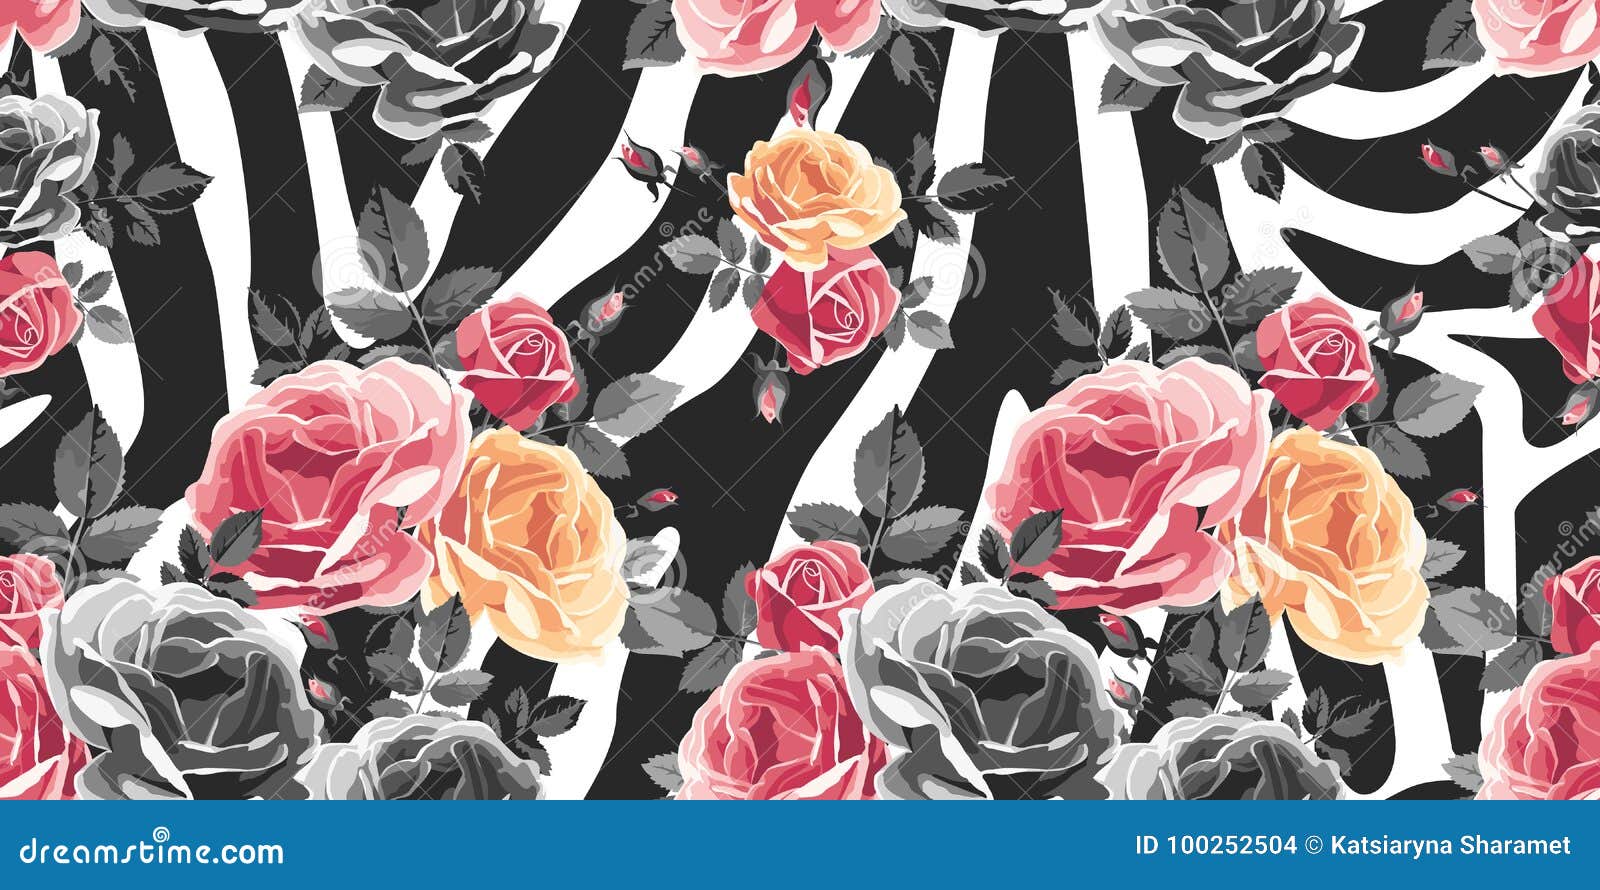 roses seamless pattern on zebra background. animal abstract print.